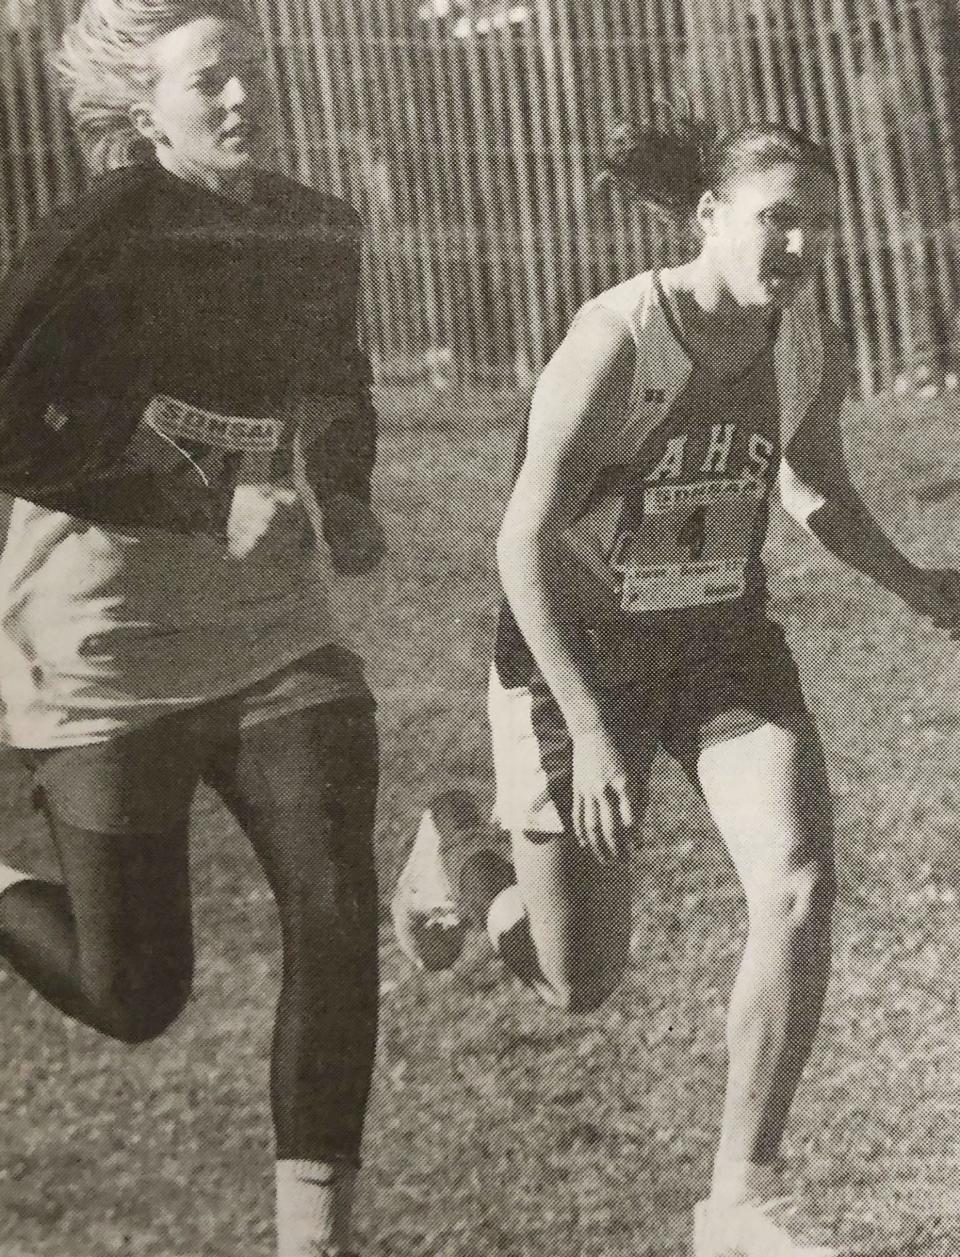 Jeni Chring of Estelline and Kristin Peterson of Arlington near the finish line in the Class B girls' race during the 1999 South Dakota State High School Cross Championships at Huron. Ching finished second and Peterson, chasing an unprecedented fifth state title, took fifth.